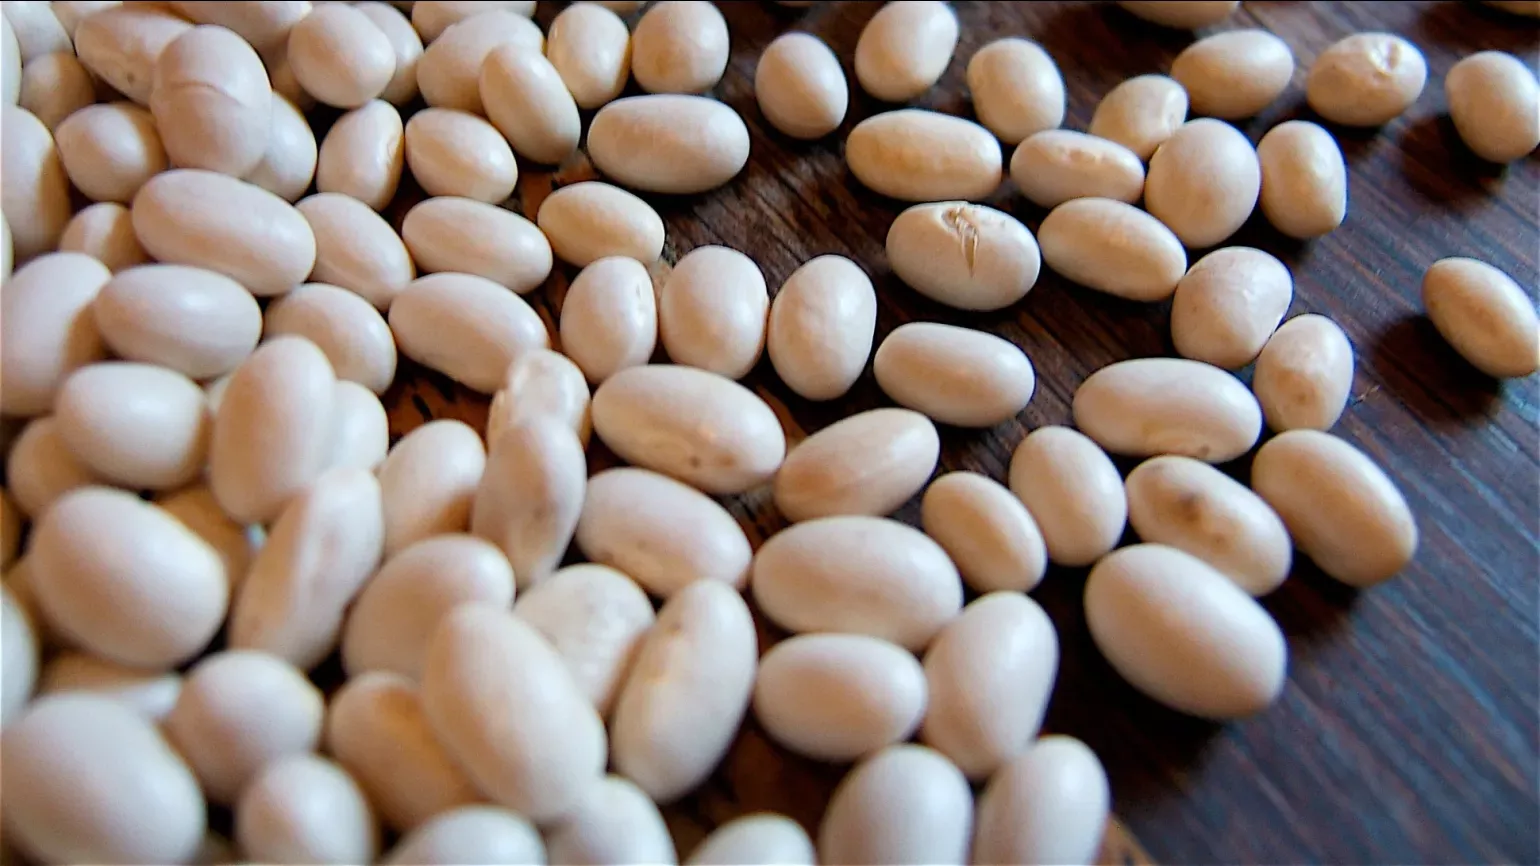 A collection of smooth white beans on a wooden surface